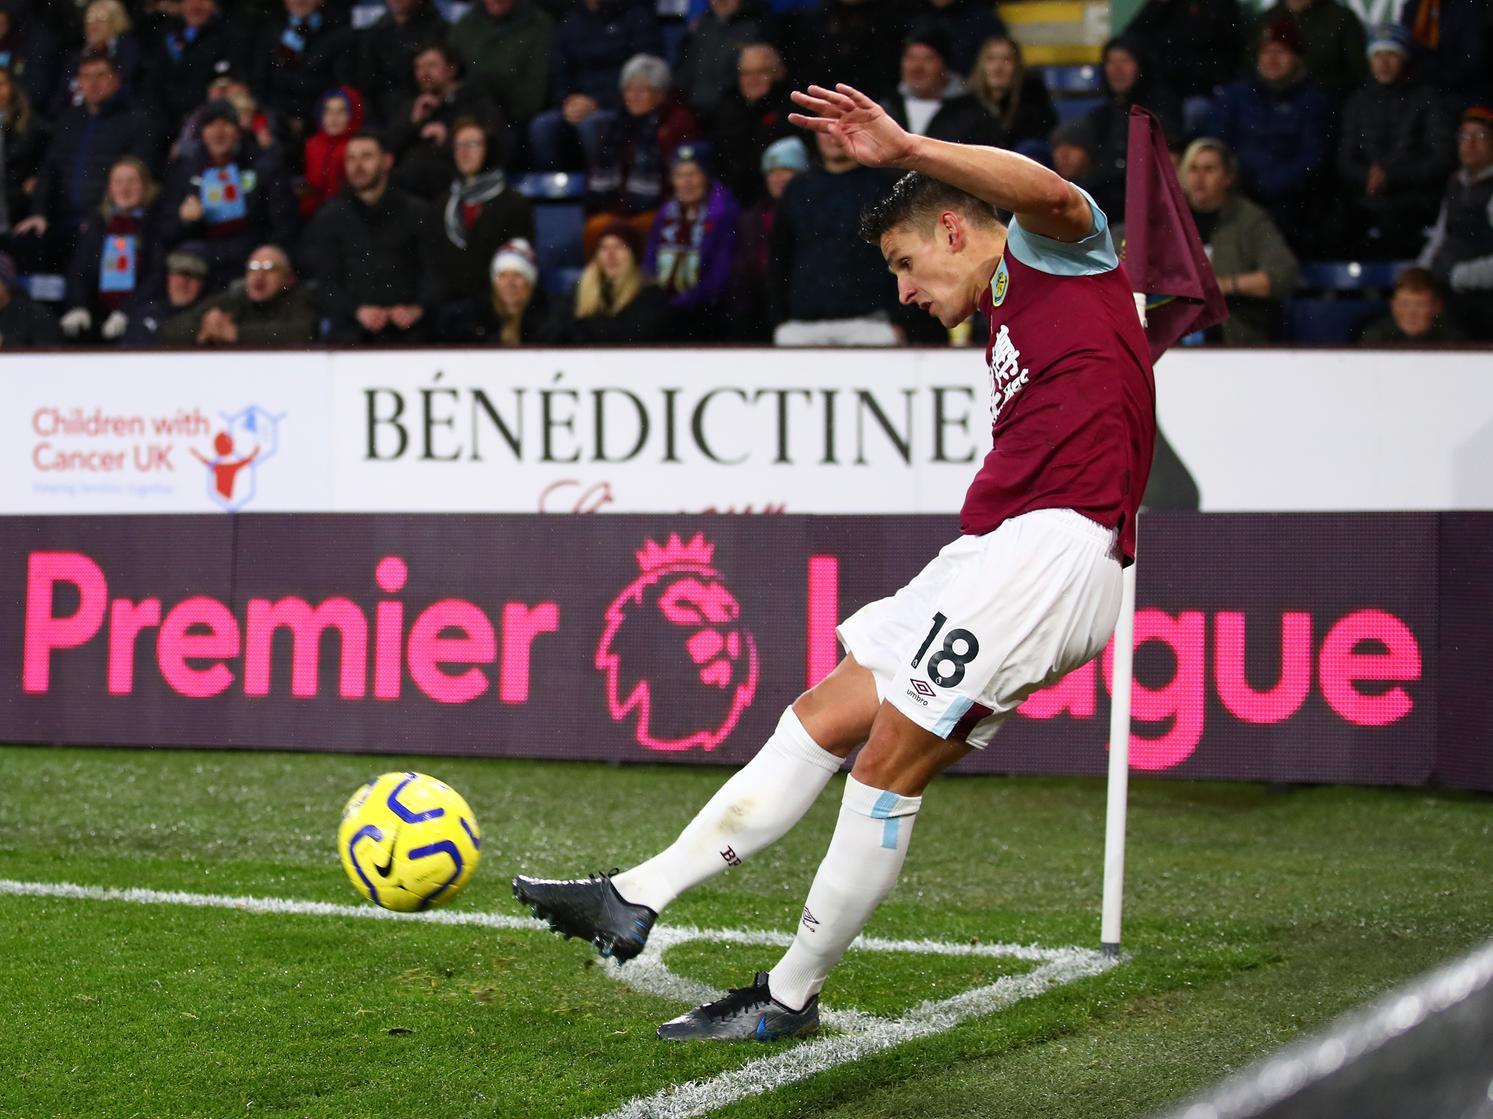 Burnley's midfield engine was back and, boy, could you tell. His energy hurried the visitors in to making errors, he soothed the play when getting on the ball and got things moving. Superb delivery for Wood's winner..